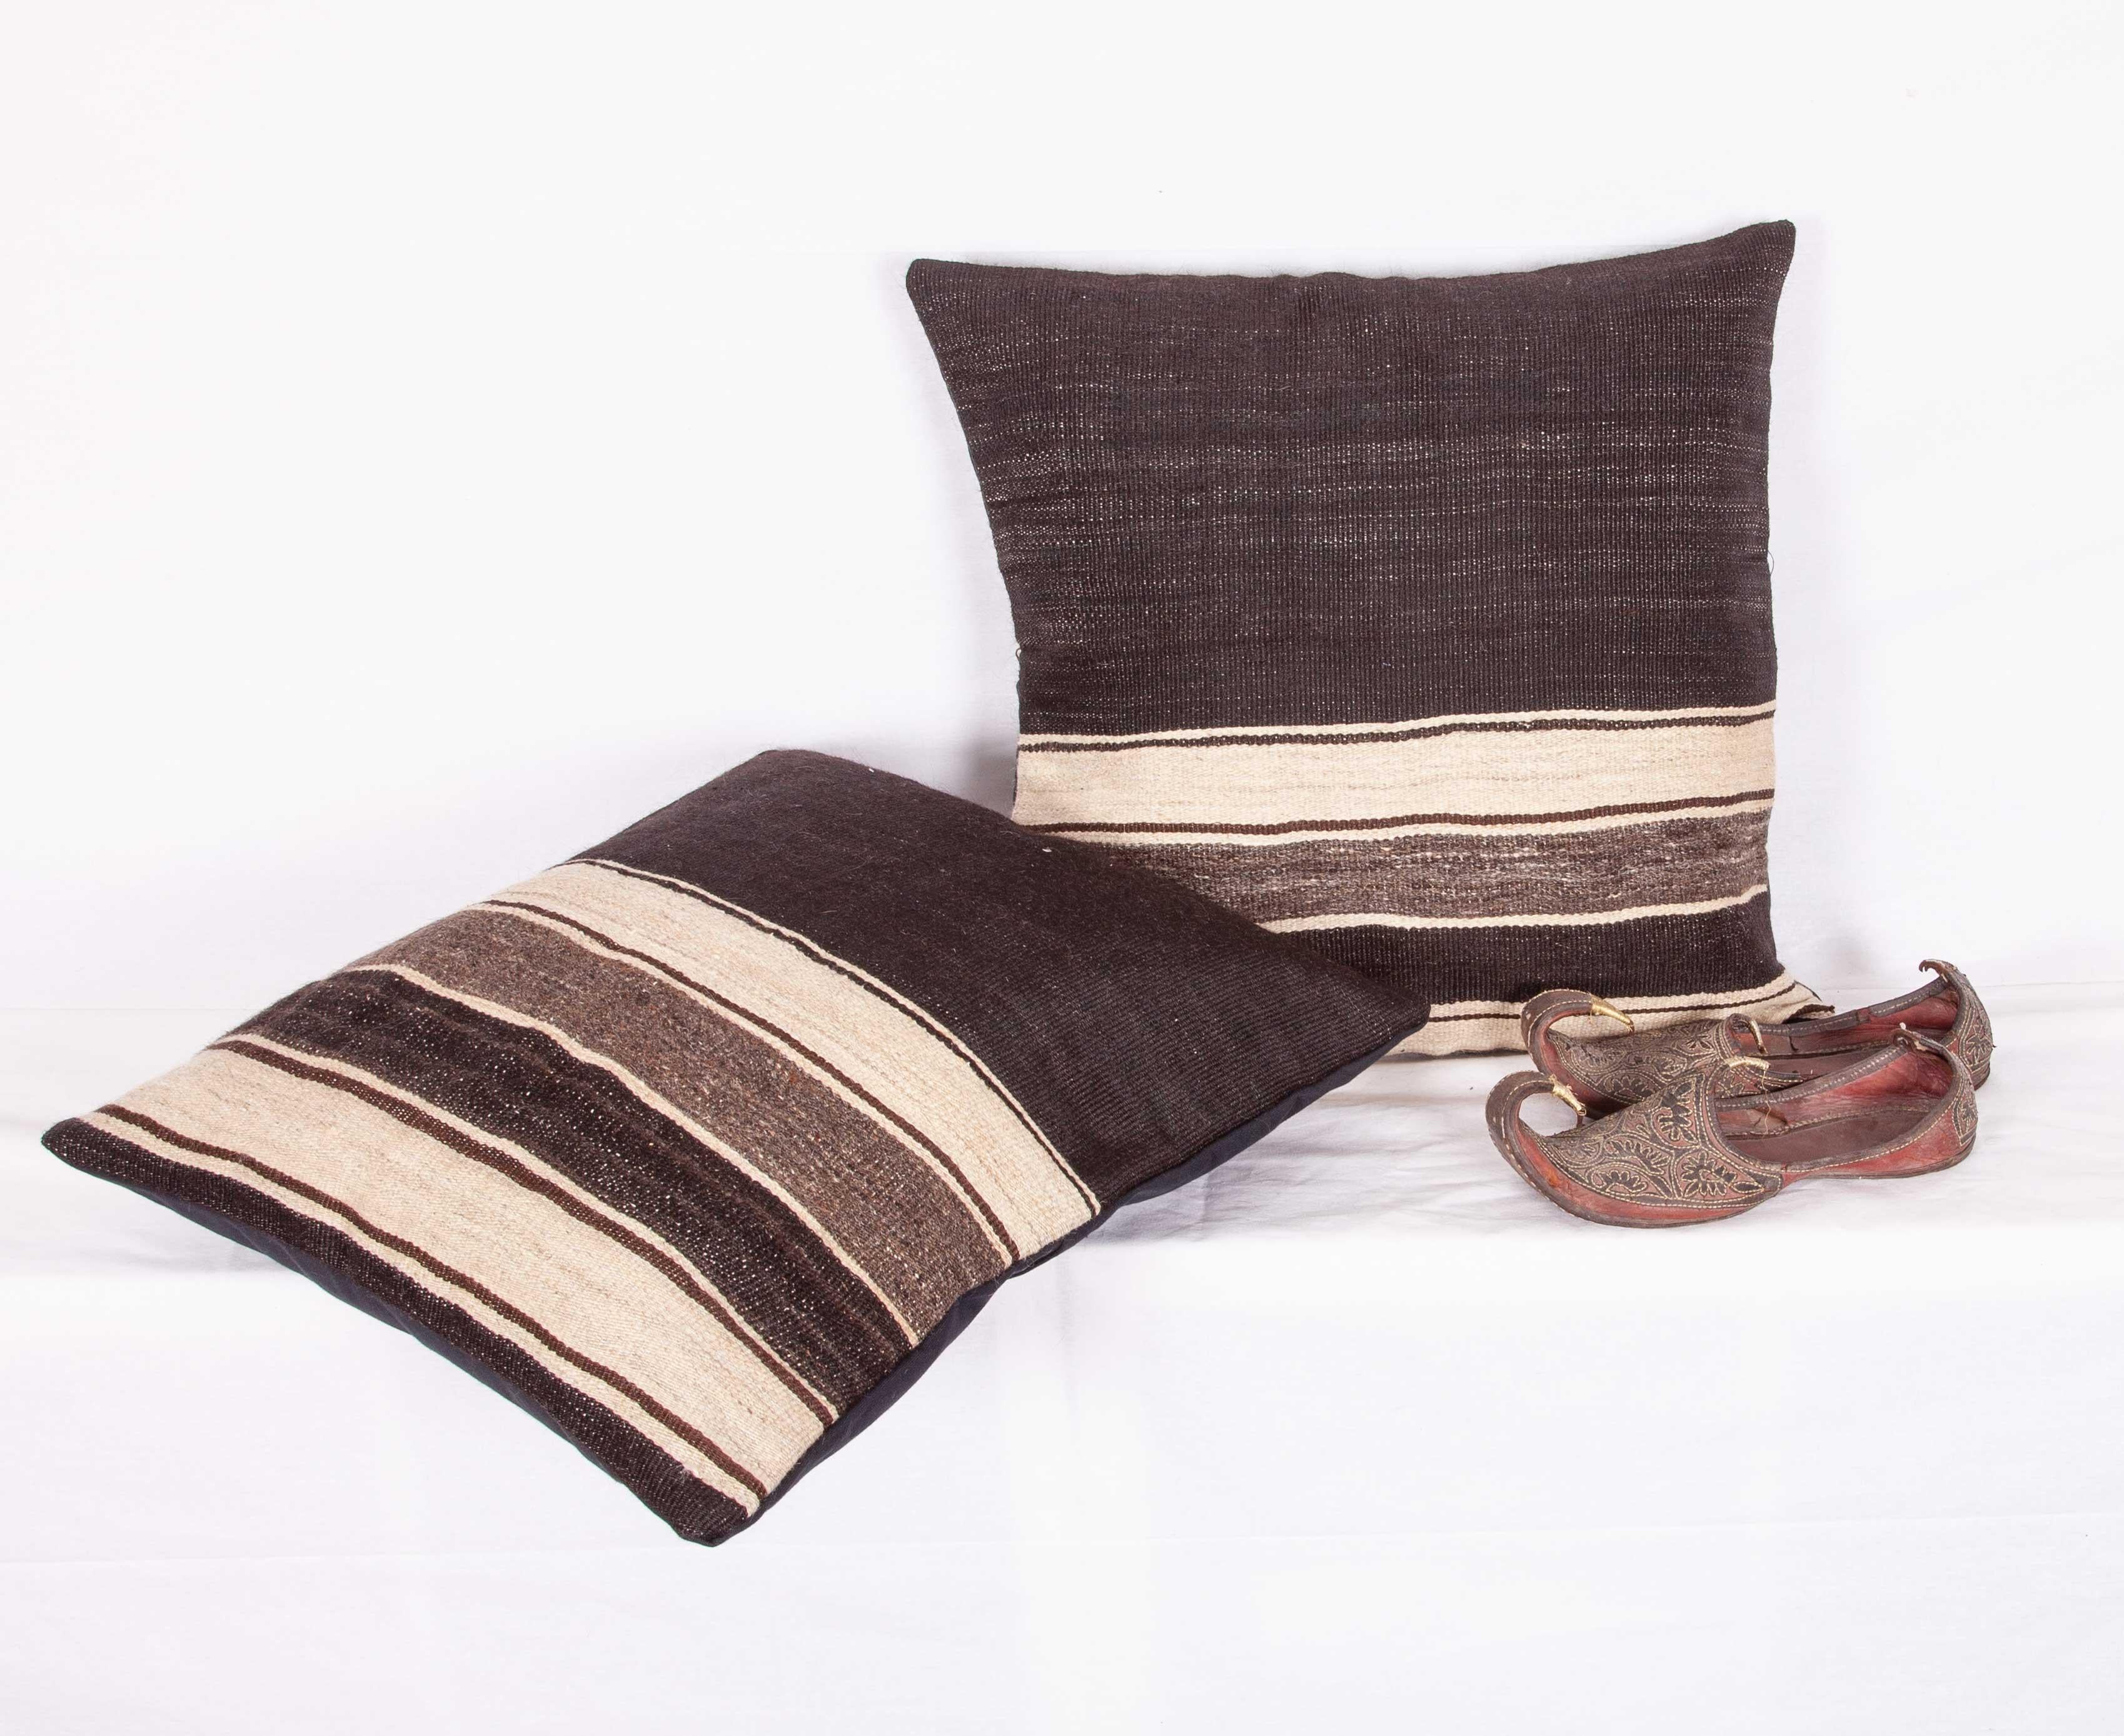 Tulu Pillows Are Made Out of Mid-20th Century, Anatolian Angora Siirt Blanket